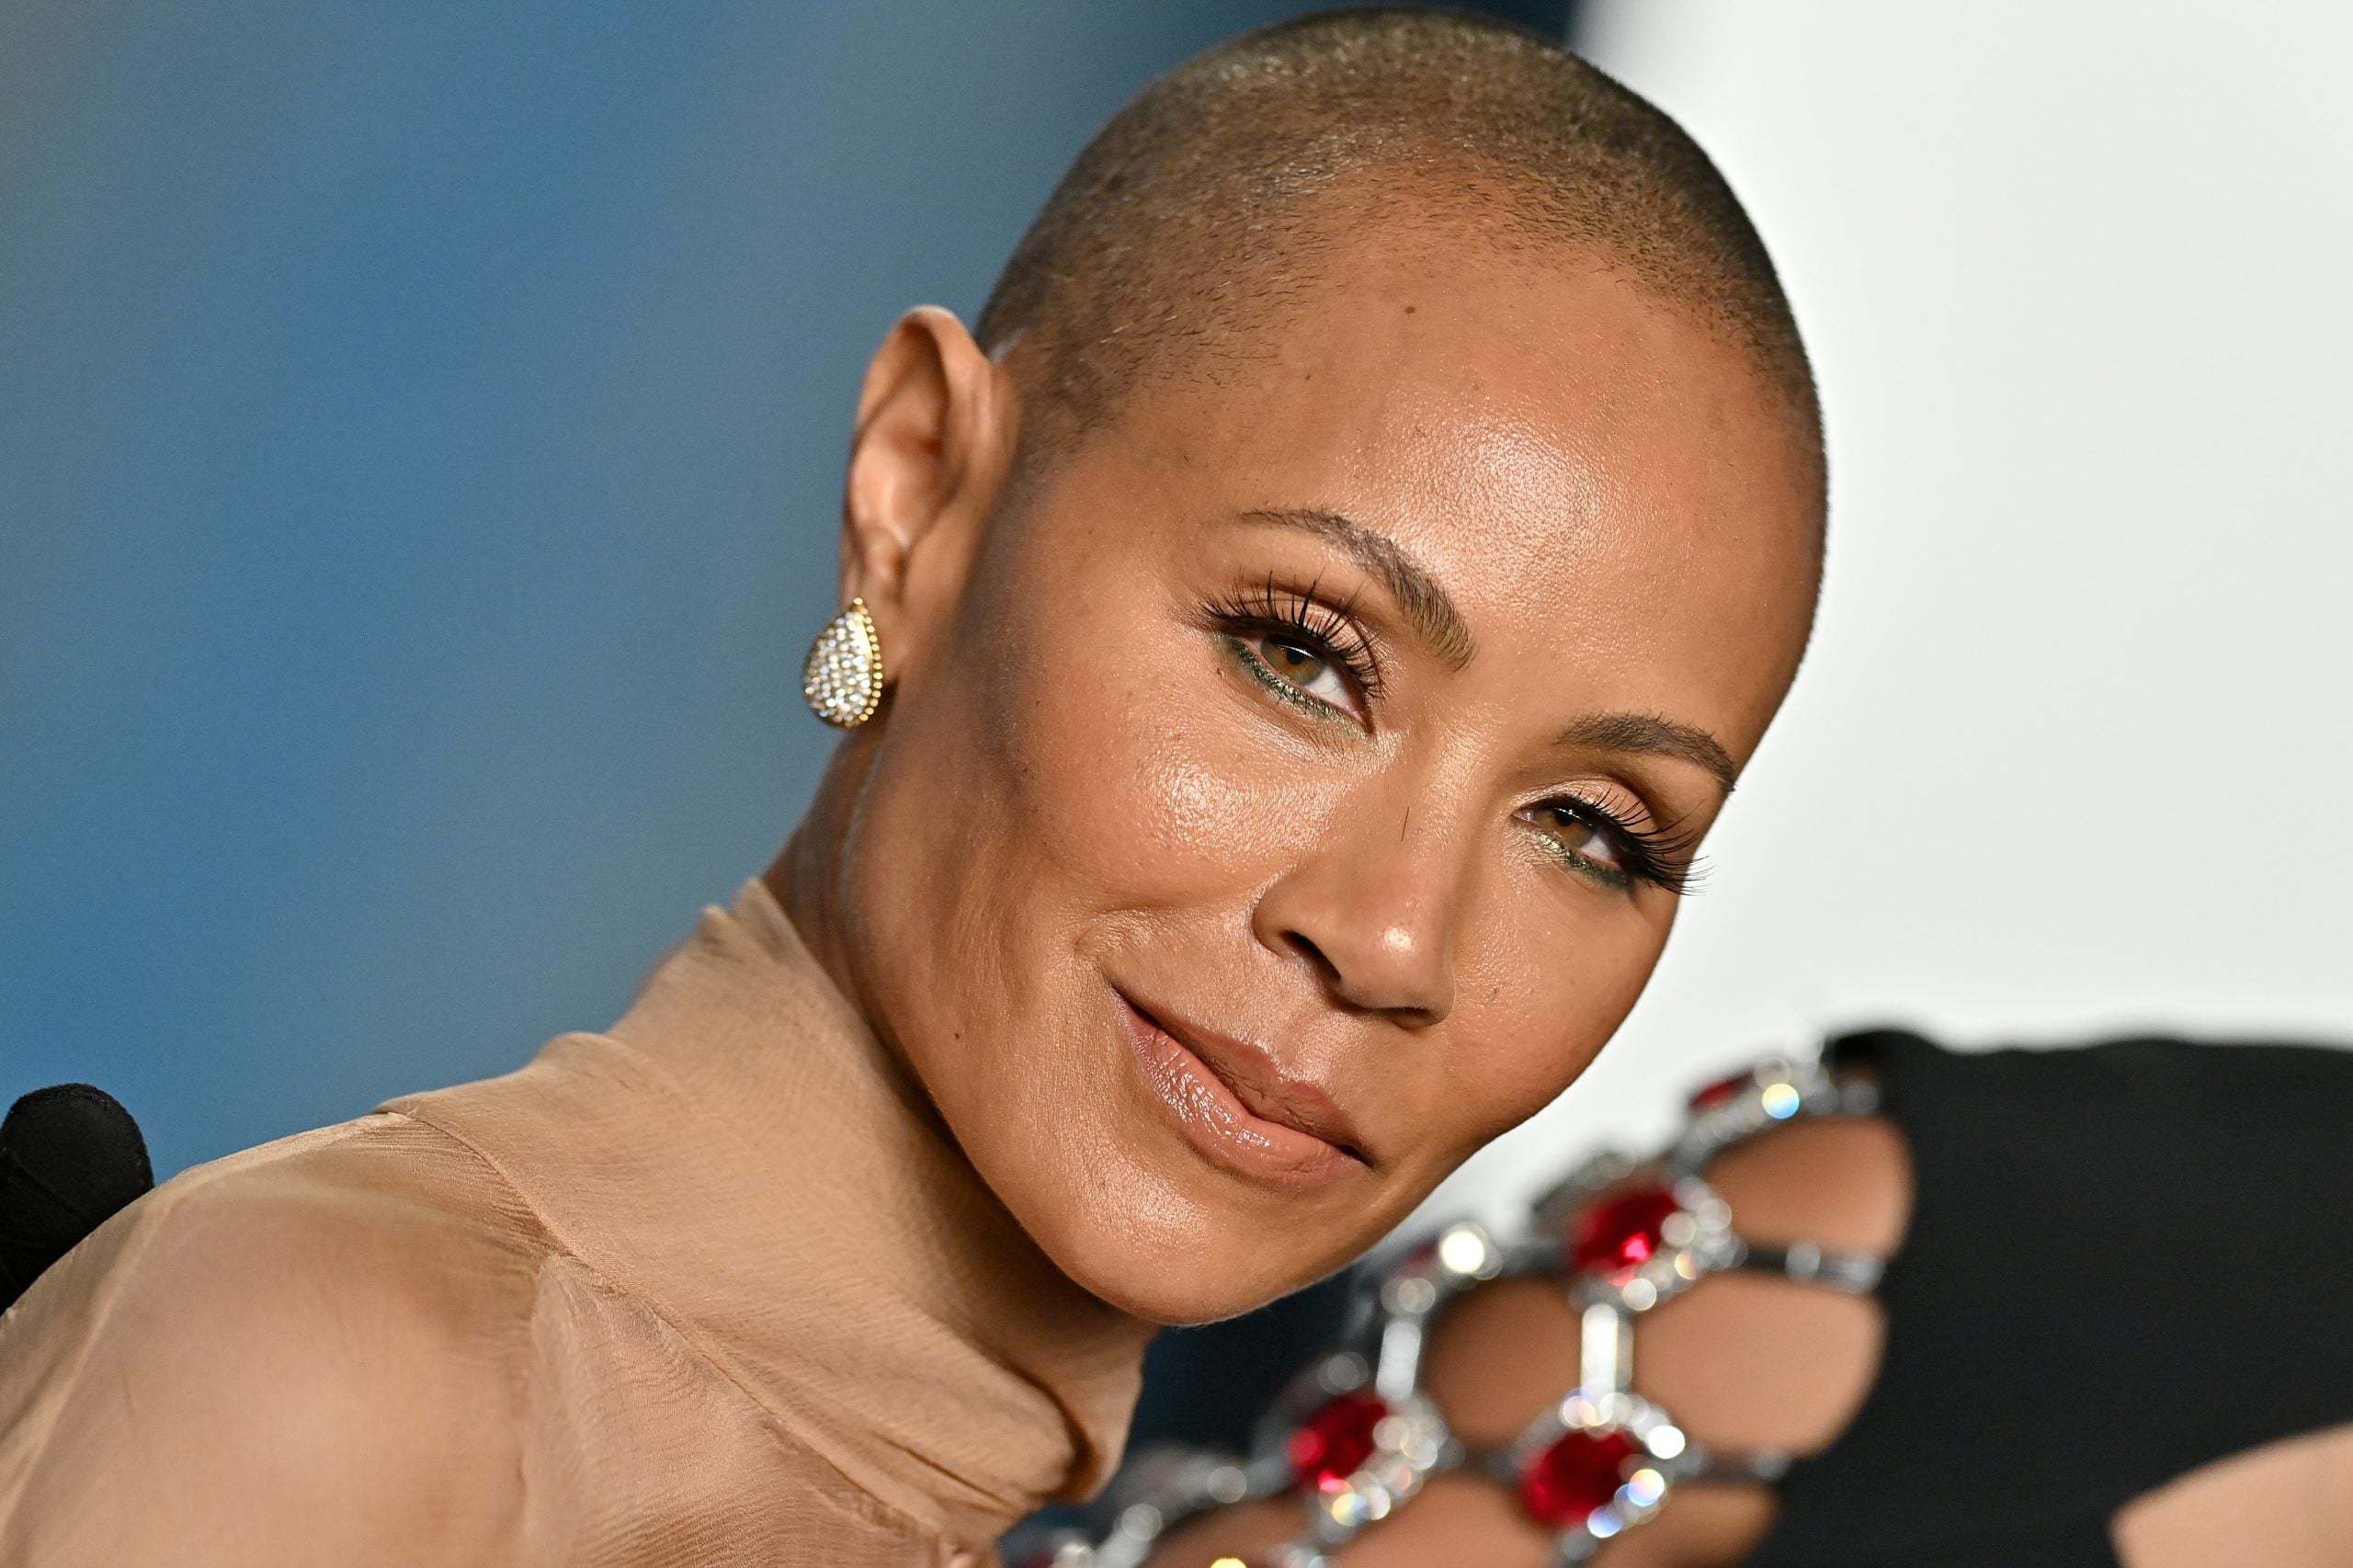 Jada Pinkett Smith Opens Up About The Oscars And Her Struggle With Alopecia On Red Table Talk